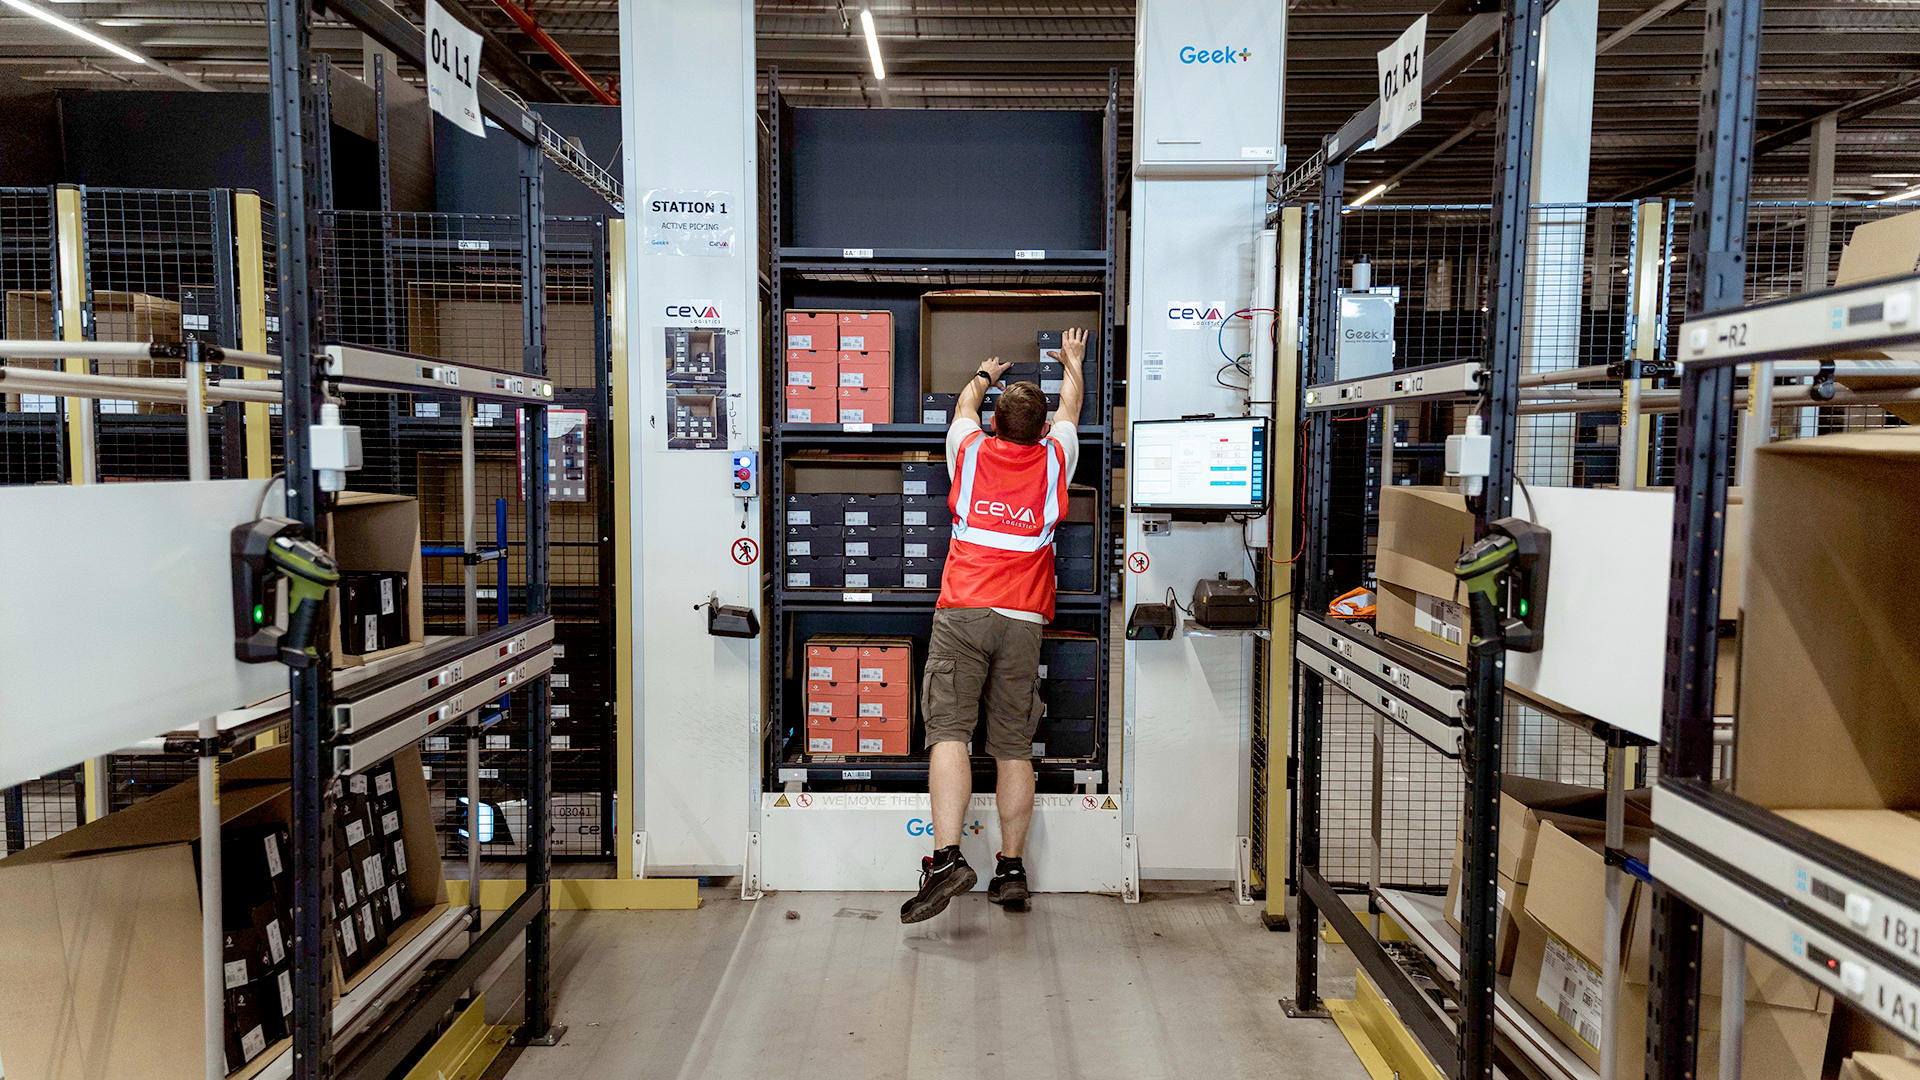 CEVA Logistics, Geek+ implement new AMR solutions at Grobbendonk distribution site in Belgium